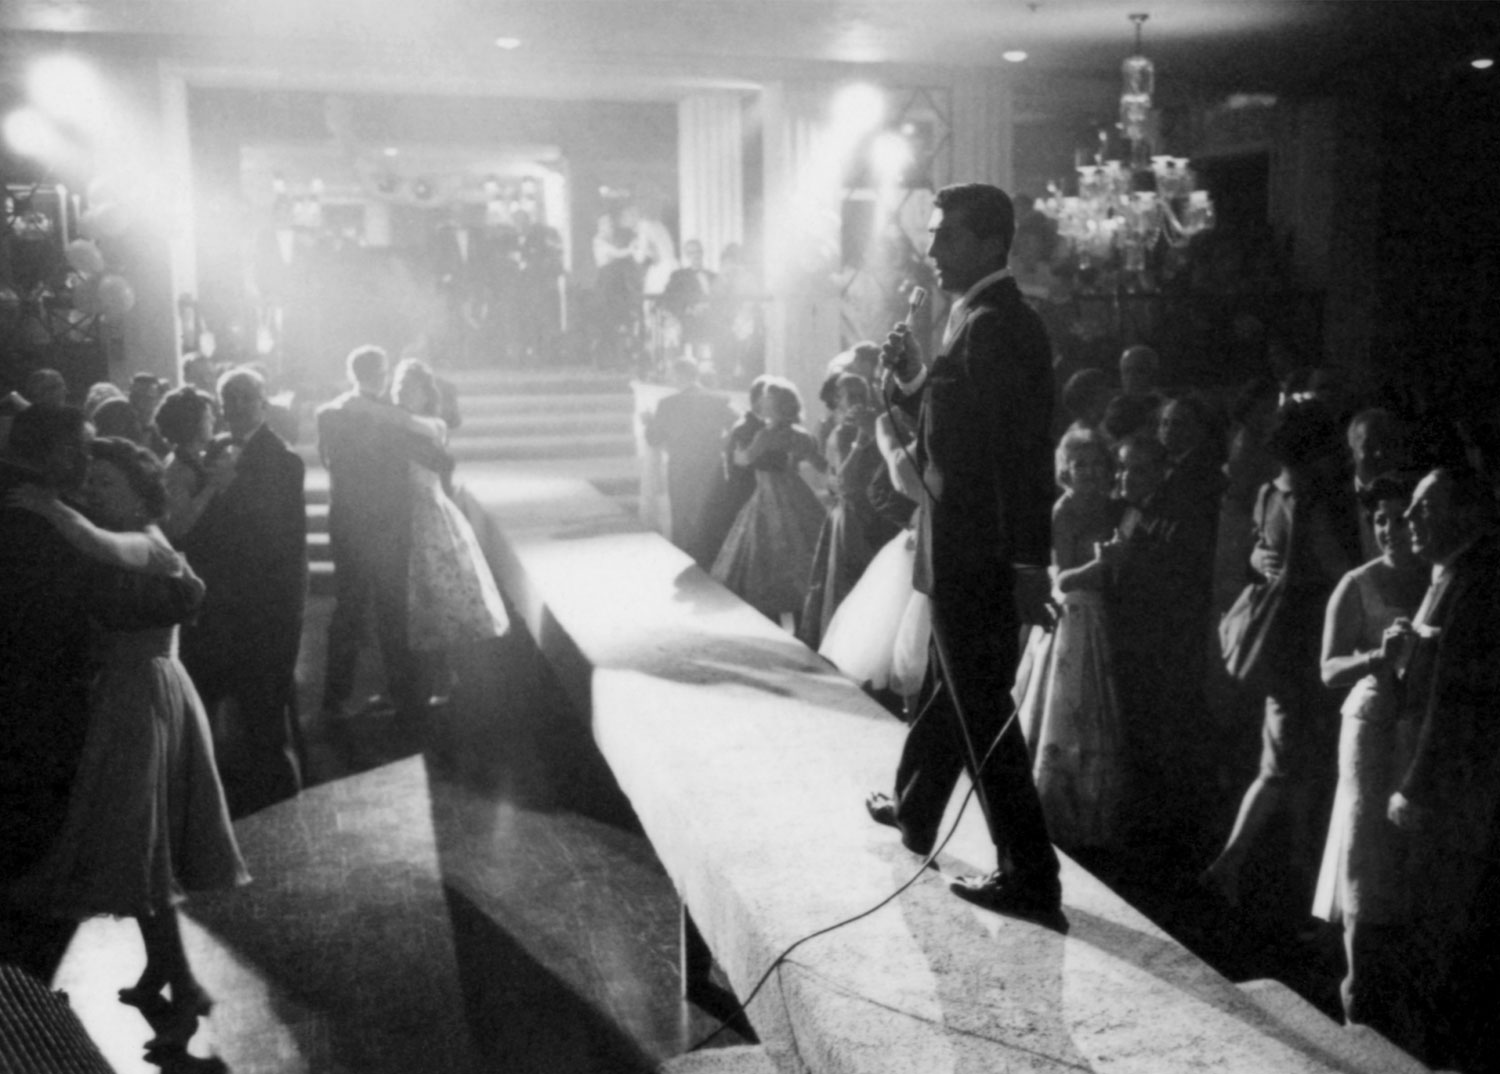 Dean Martin entertains on a narrow stage with couples dancing around him in 1958.